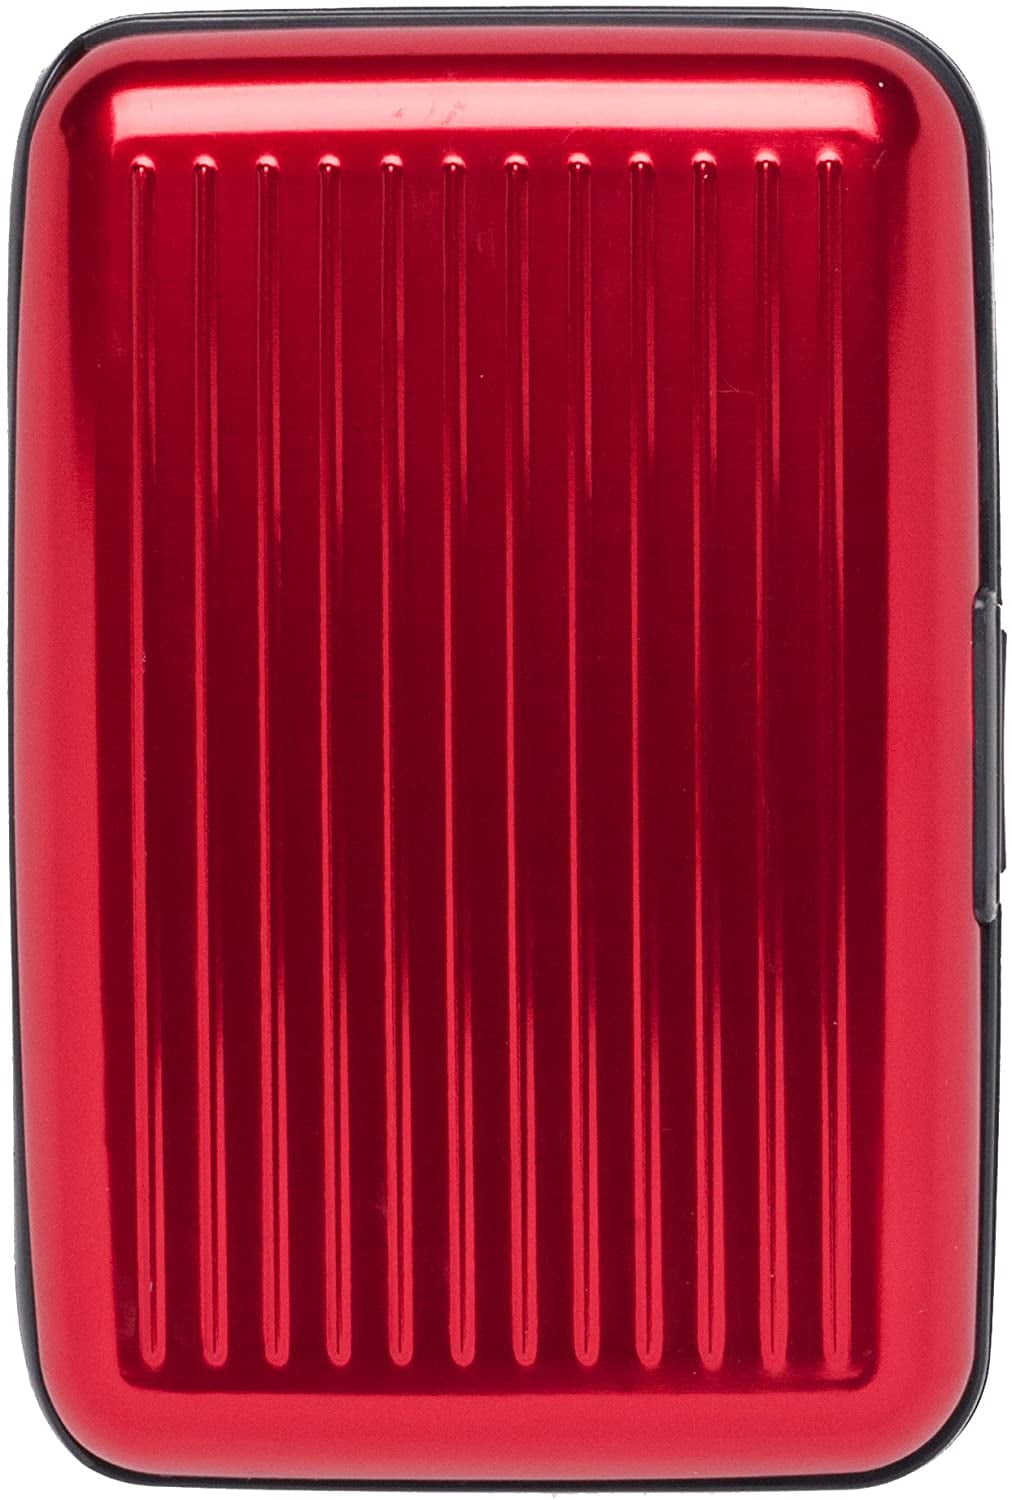 Slim Design Fits in Front Pocket Monarque Red Solid Armored Wallet Credit Card Case with RFID Data Theft Protection 